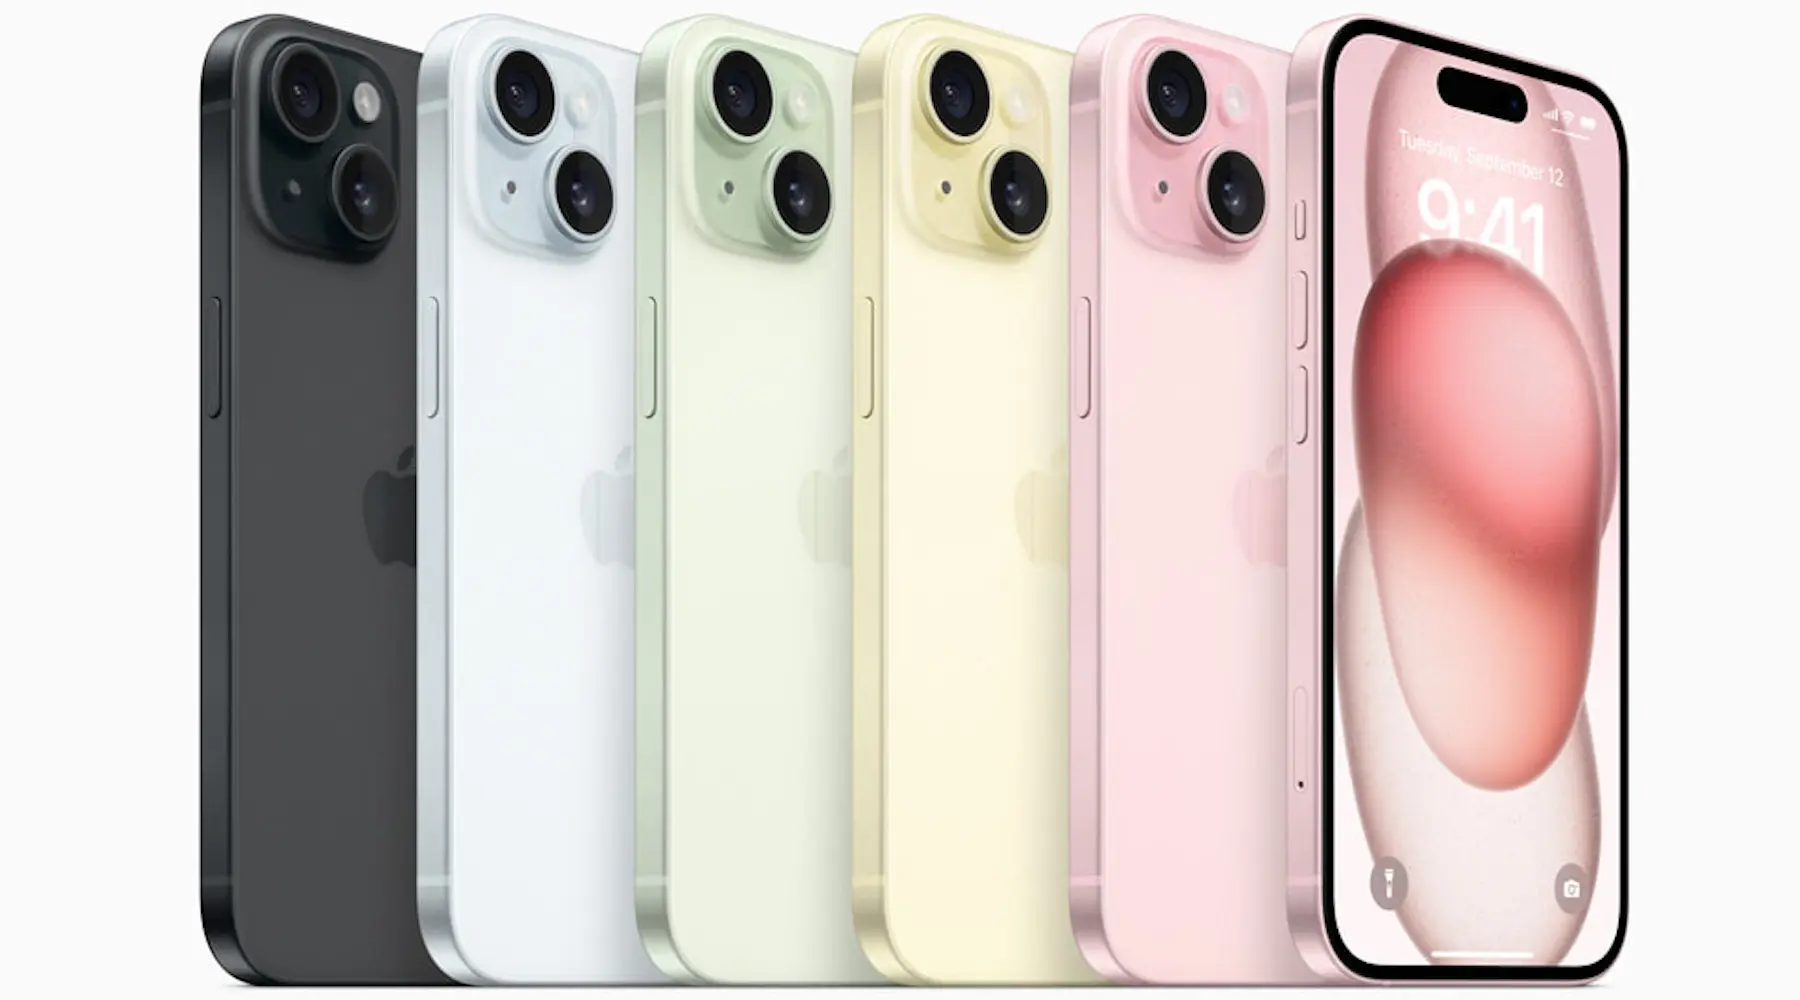 iPhone 15 and iPhone 15 Plus colours: black, blue, green, yellow, and pink.